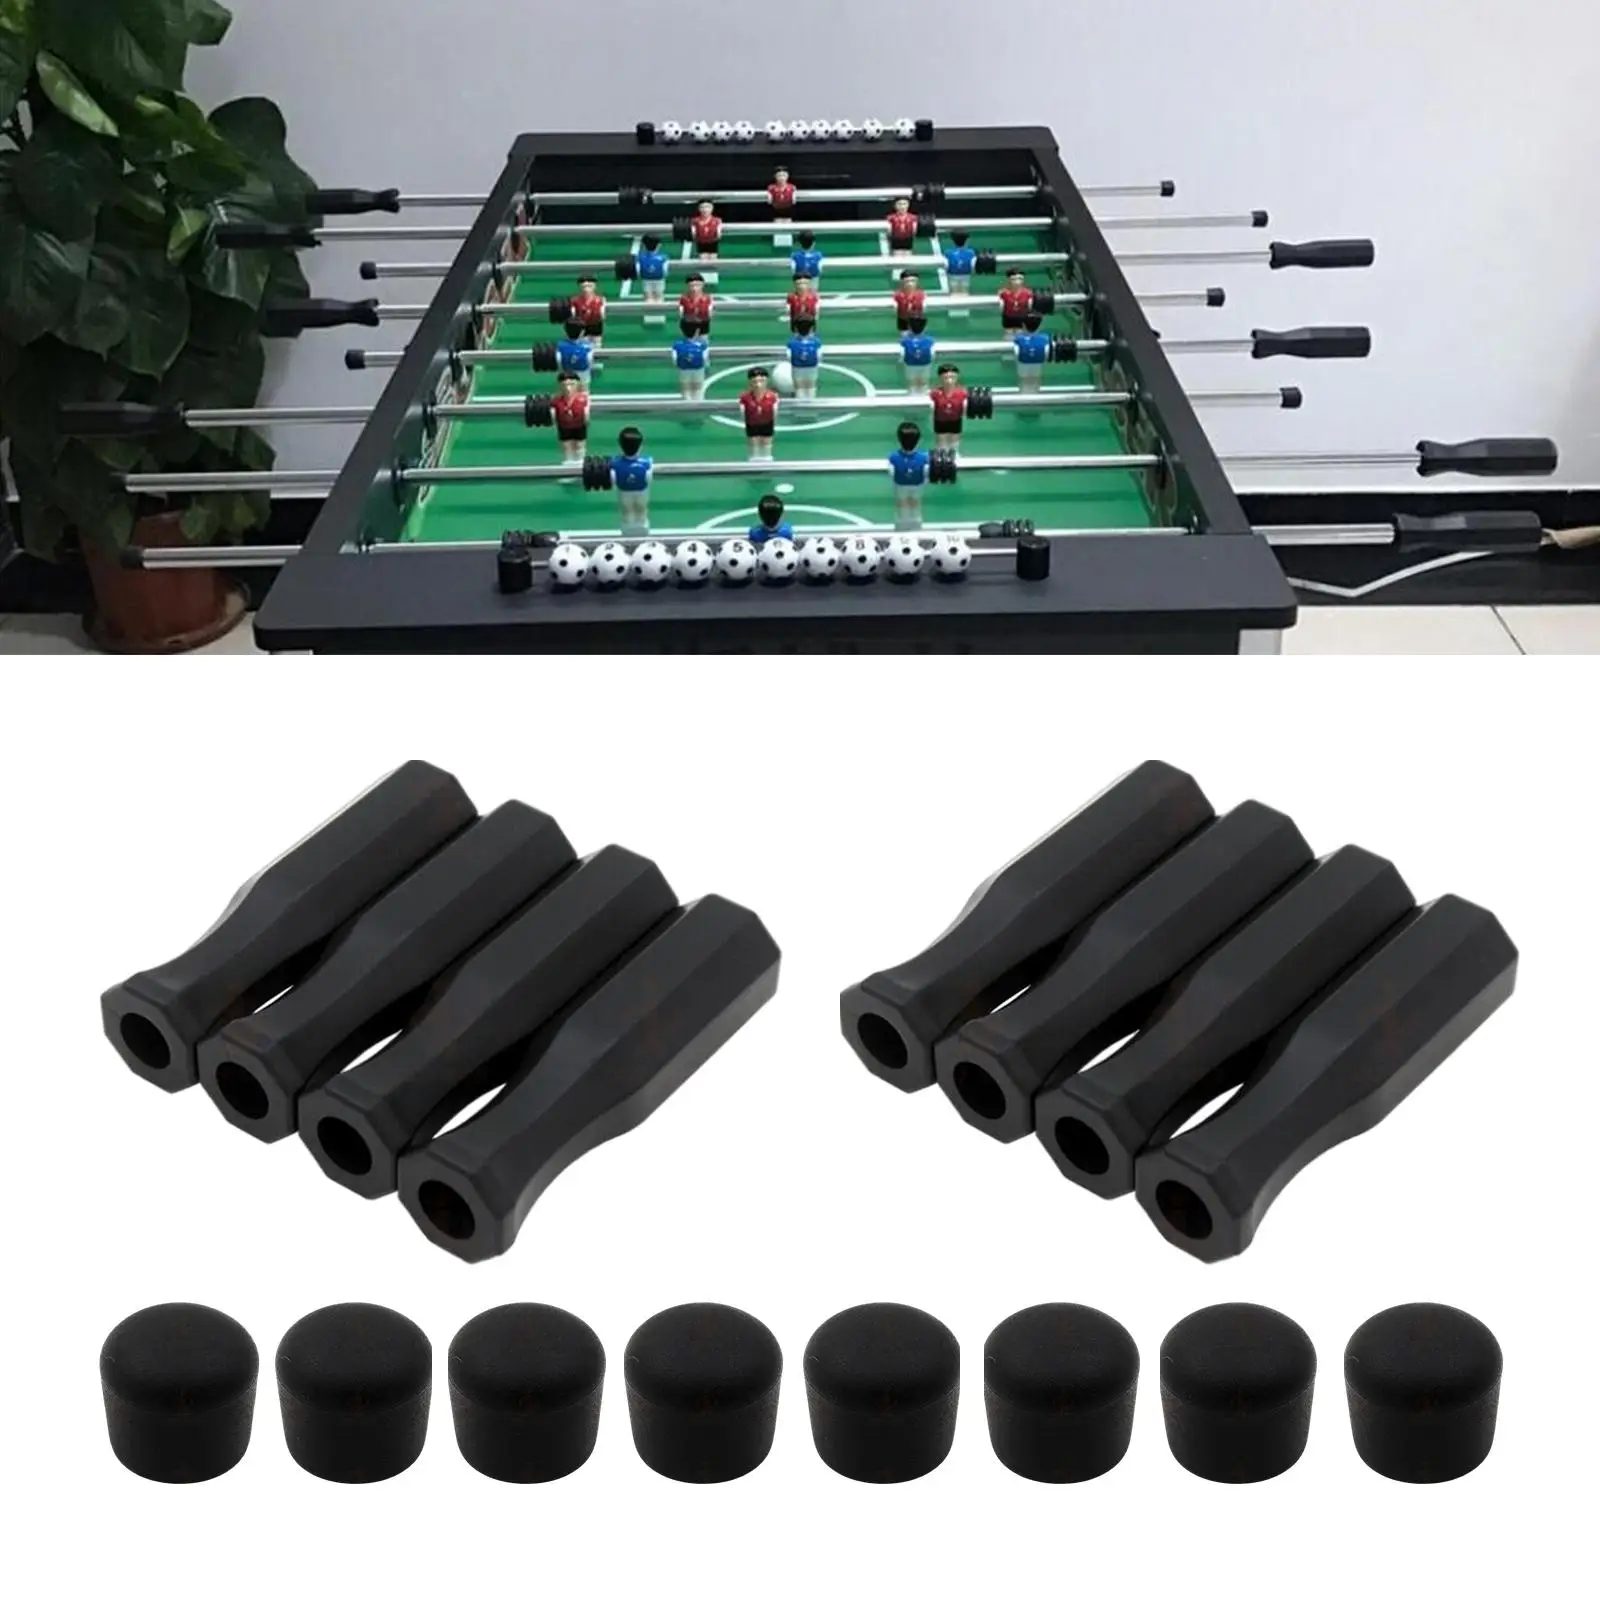 16Pcs Octagonal Handles and Safety End Caps Standard Foosball Tables